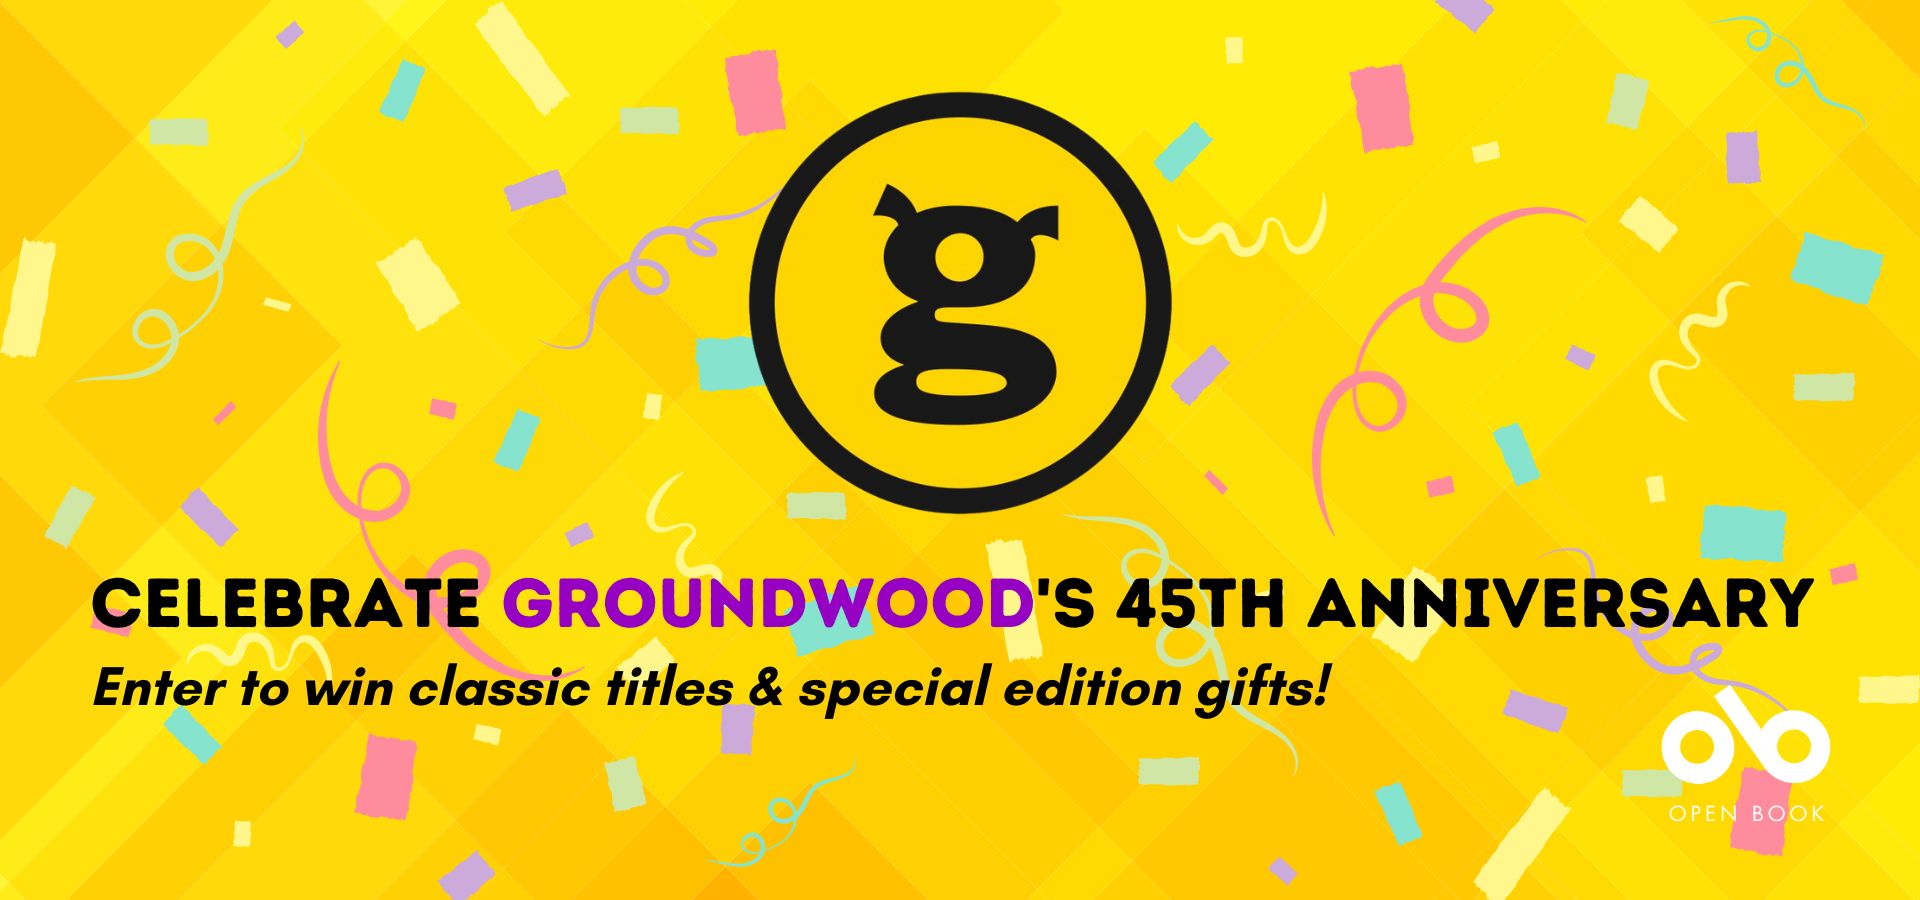 Yellow banner with multicolour confetti, the Groundwood Books logo, and text reading "Celebrate Groundwood's 45th Anniversary. Enter to win classic titles & special edition gifts!"